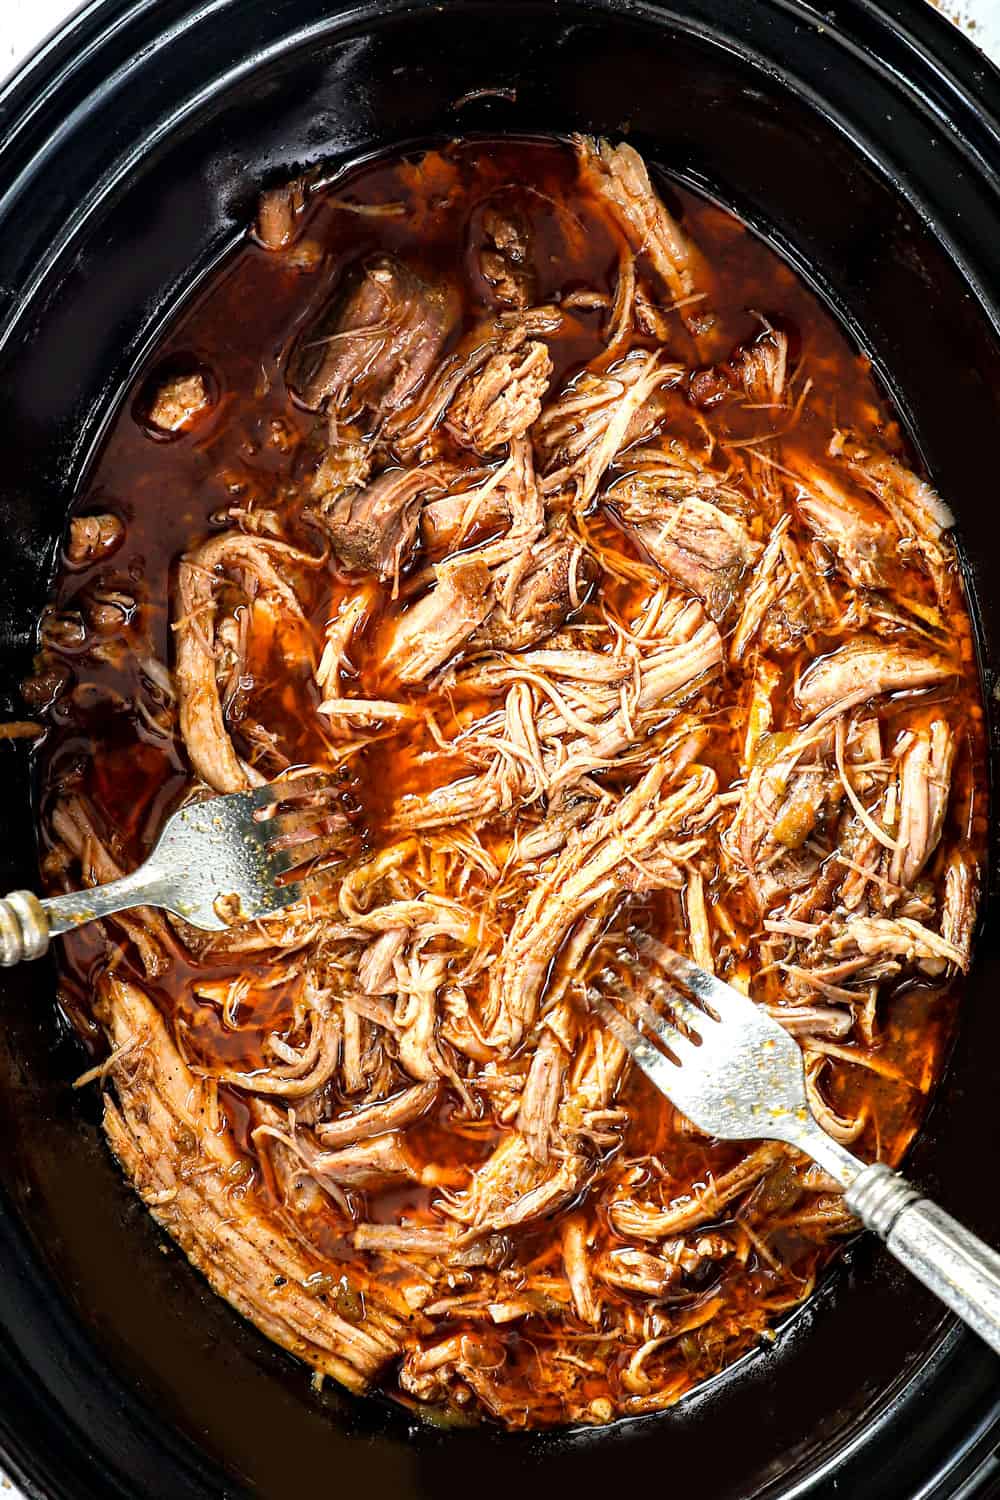 showing how to make BBQ Pulled Pork recipe by shredding the pork and allowing it to braise in the juices